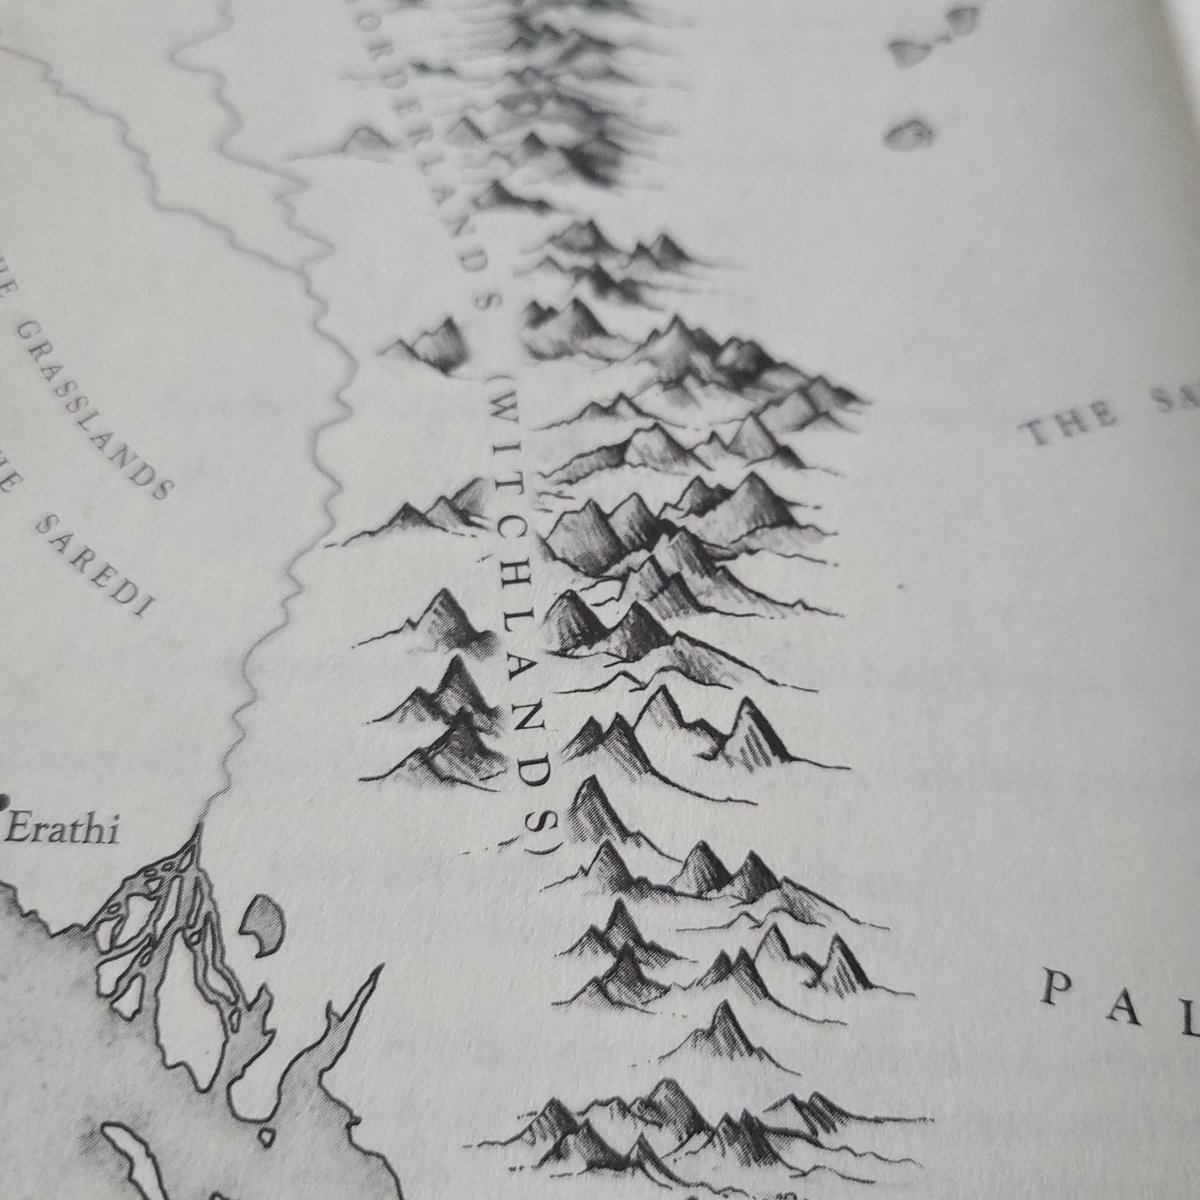 since encountering Earthsea as a child, a map at the start still thrills me (WITCH KING @ marthawells)